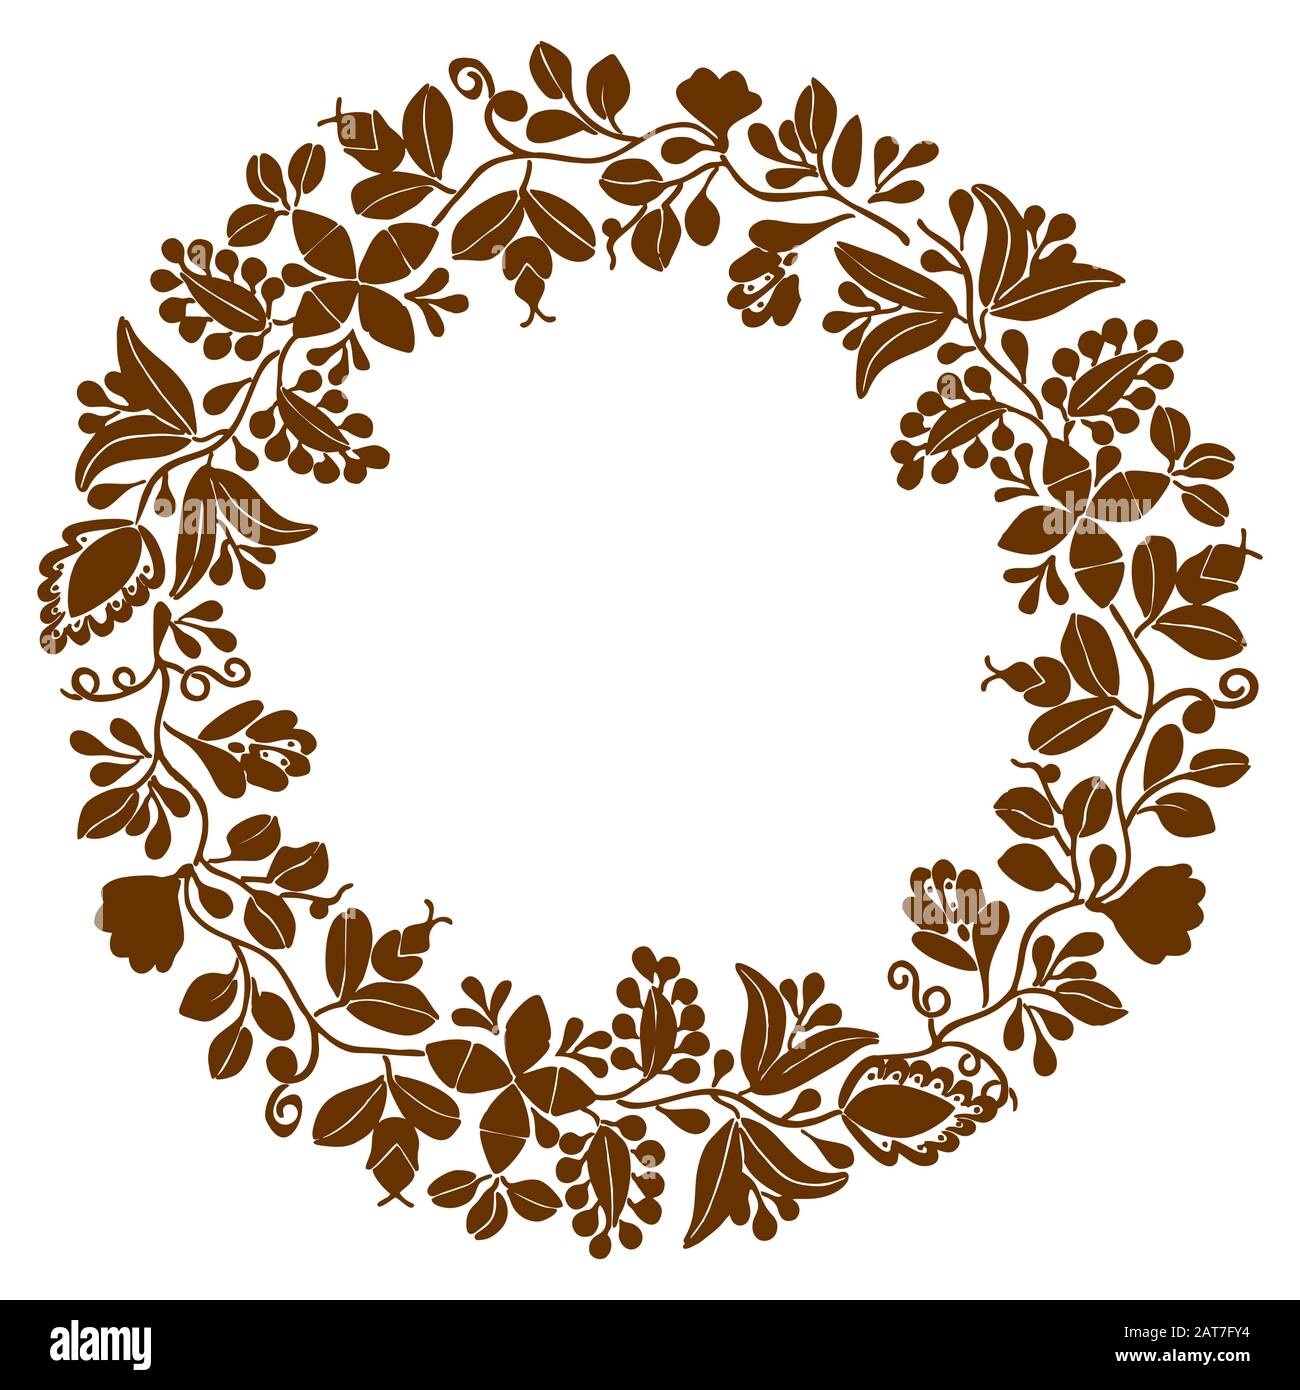 Brown floral laurel wreath vector frame on white background Stock Vector